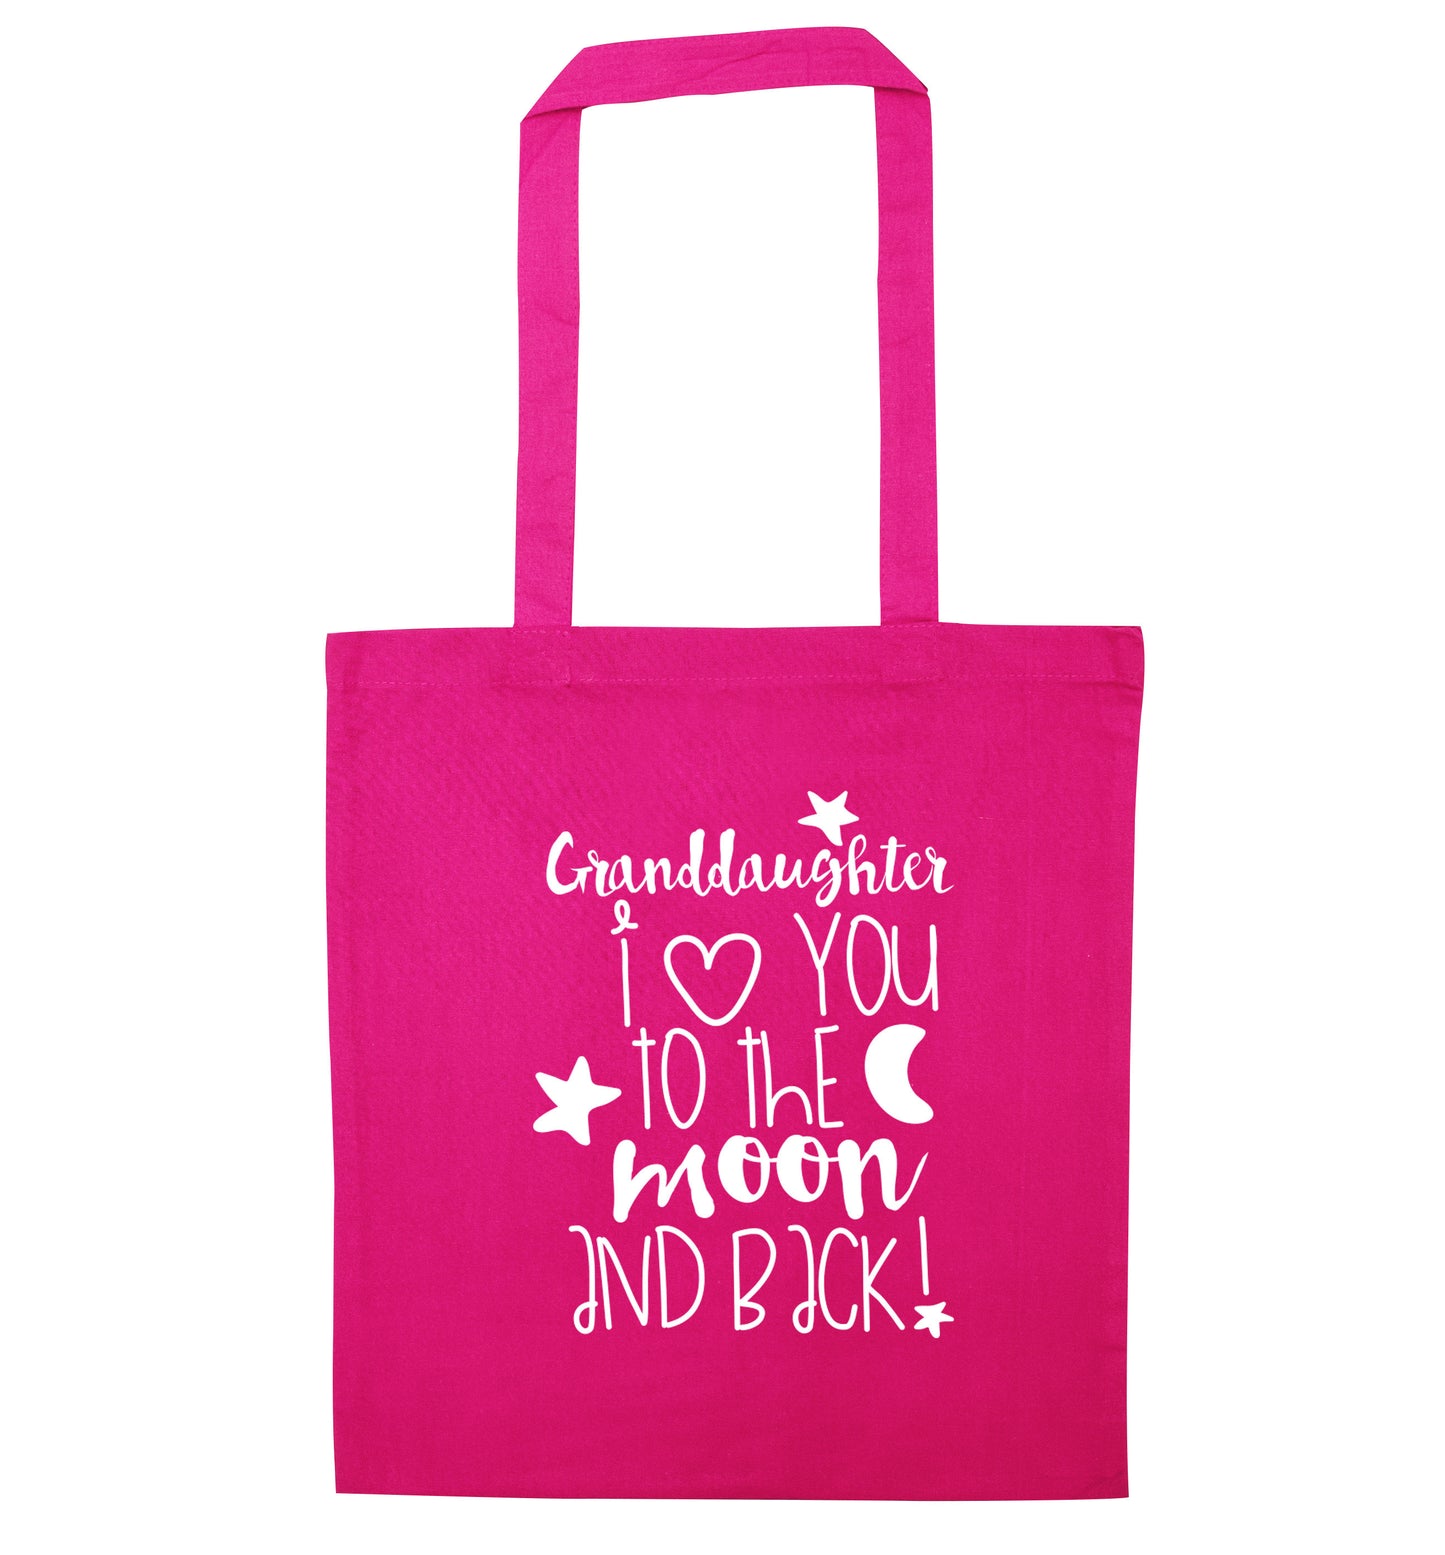 Granddaughter I love you to the moon and back pink tote bag